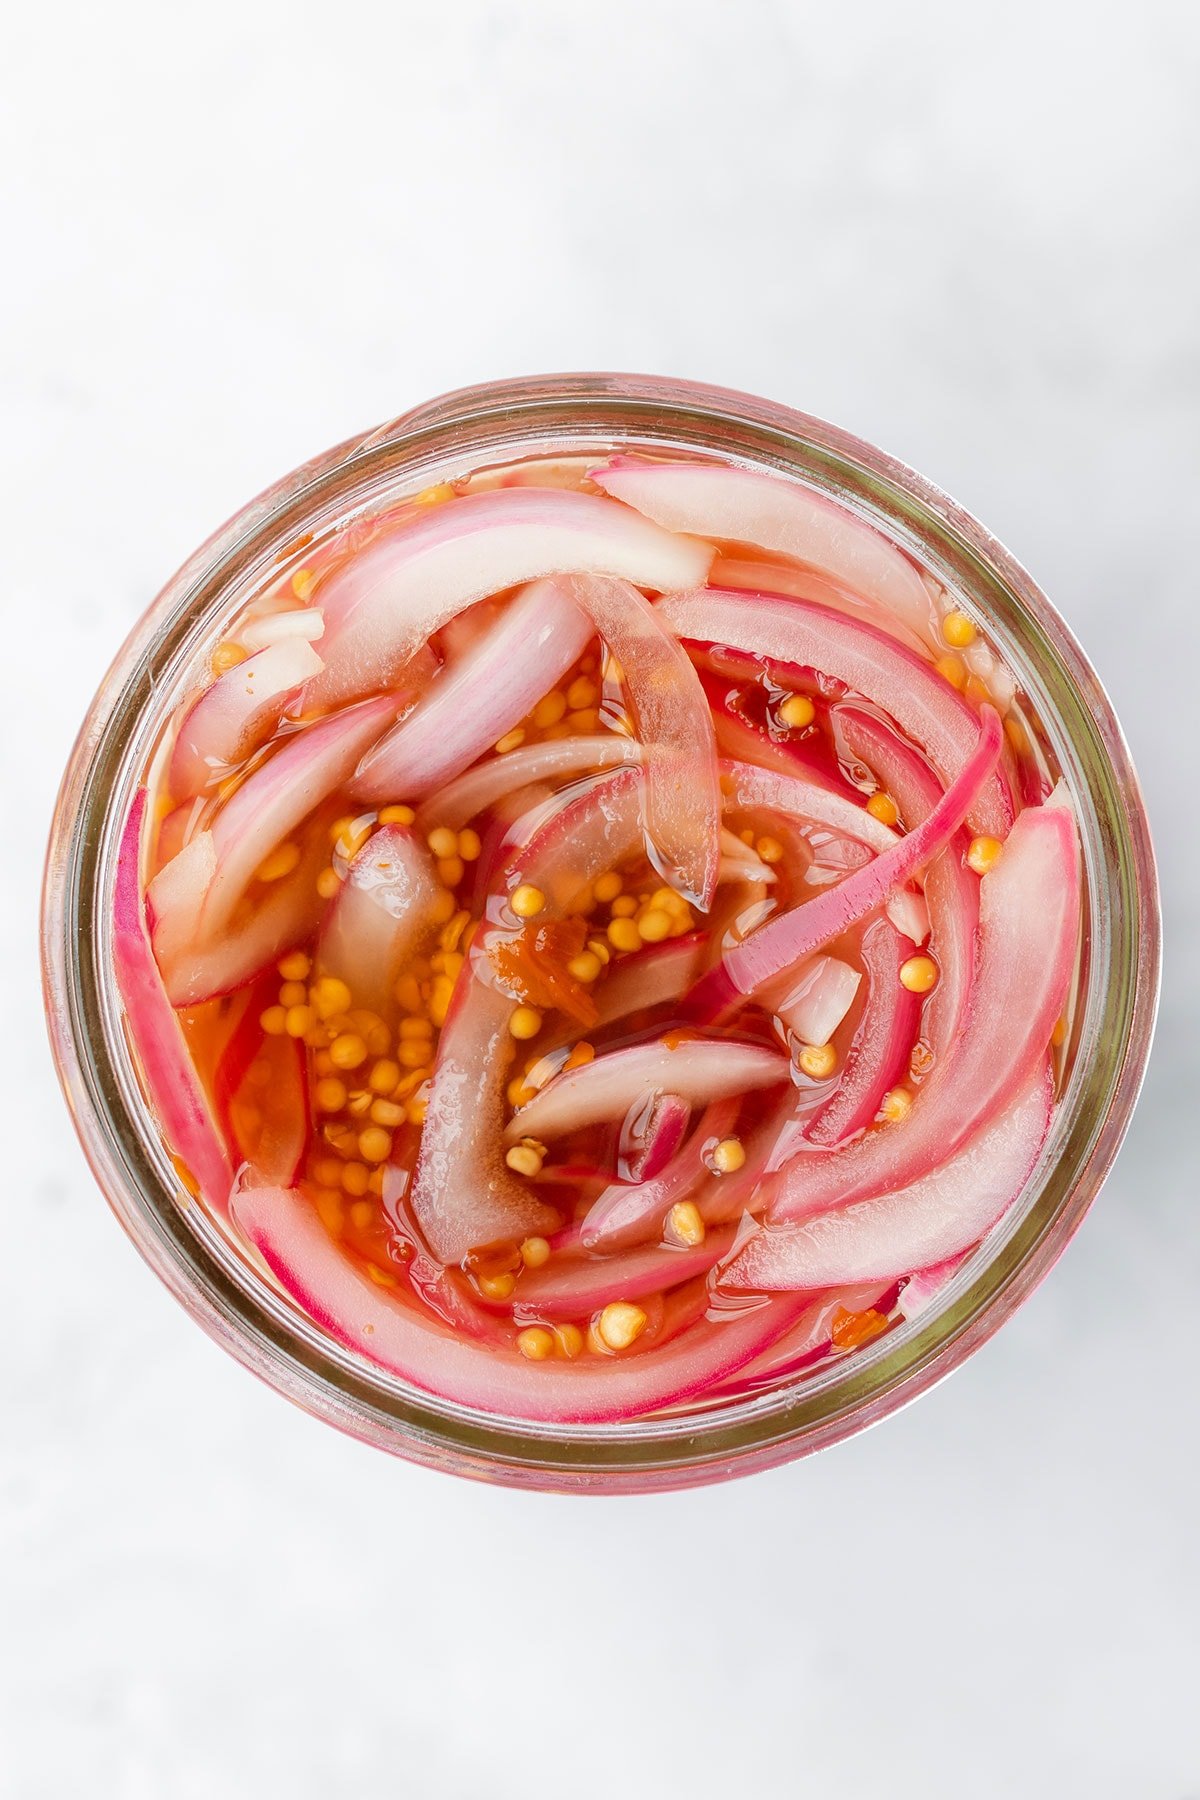 Pickled red onions in a jar slightly wilted after 30 minutes of pickling.